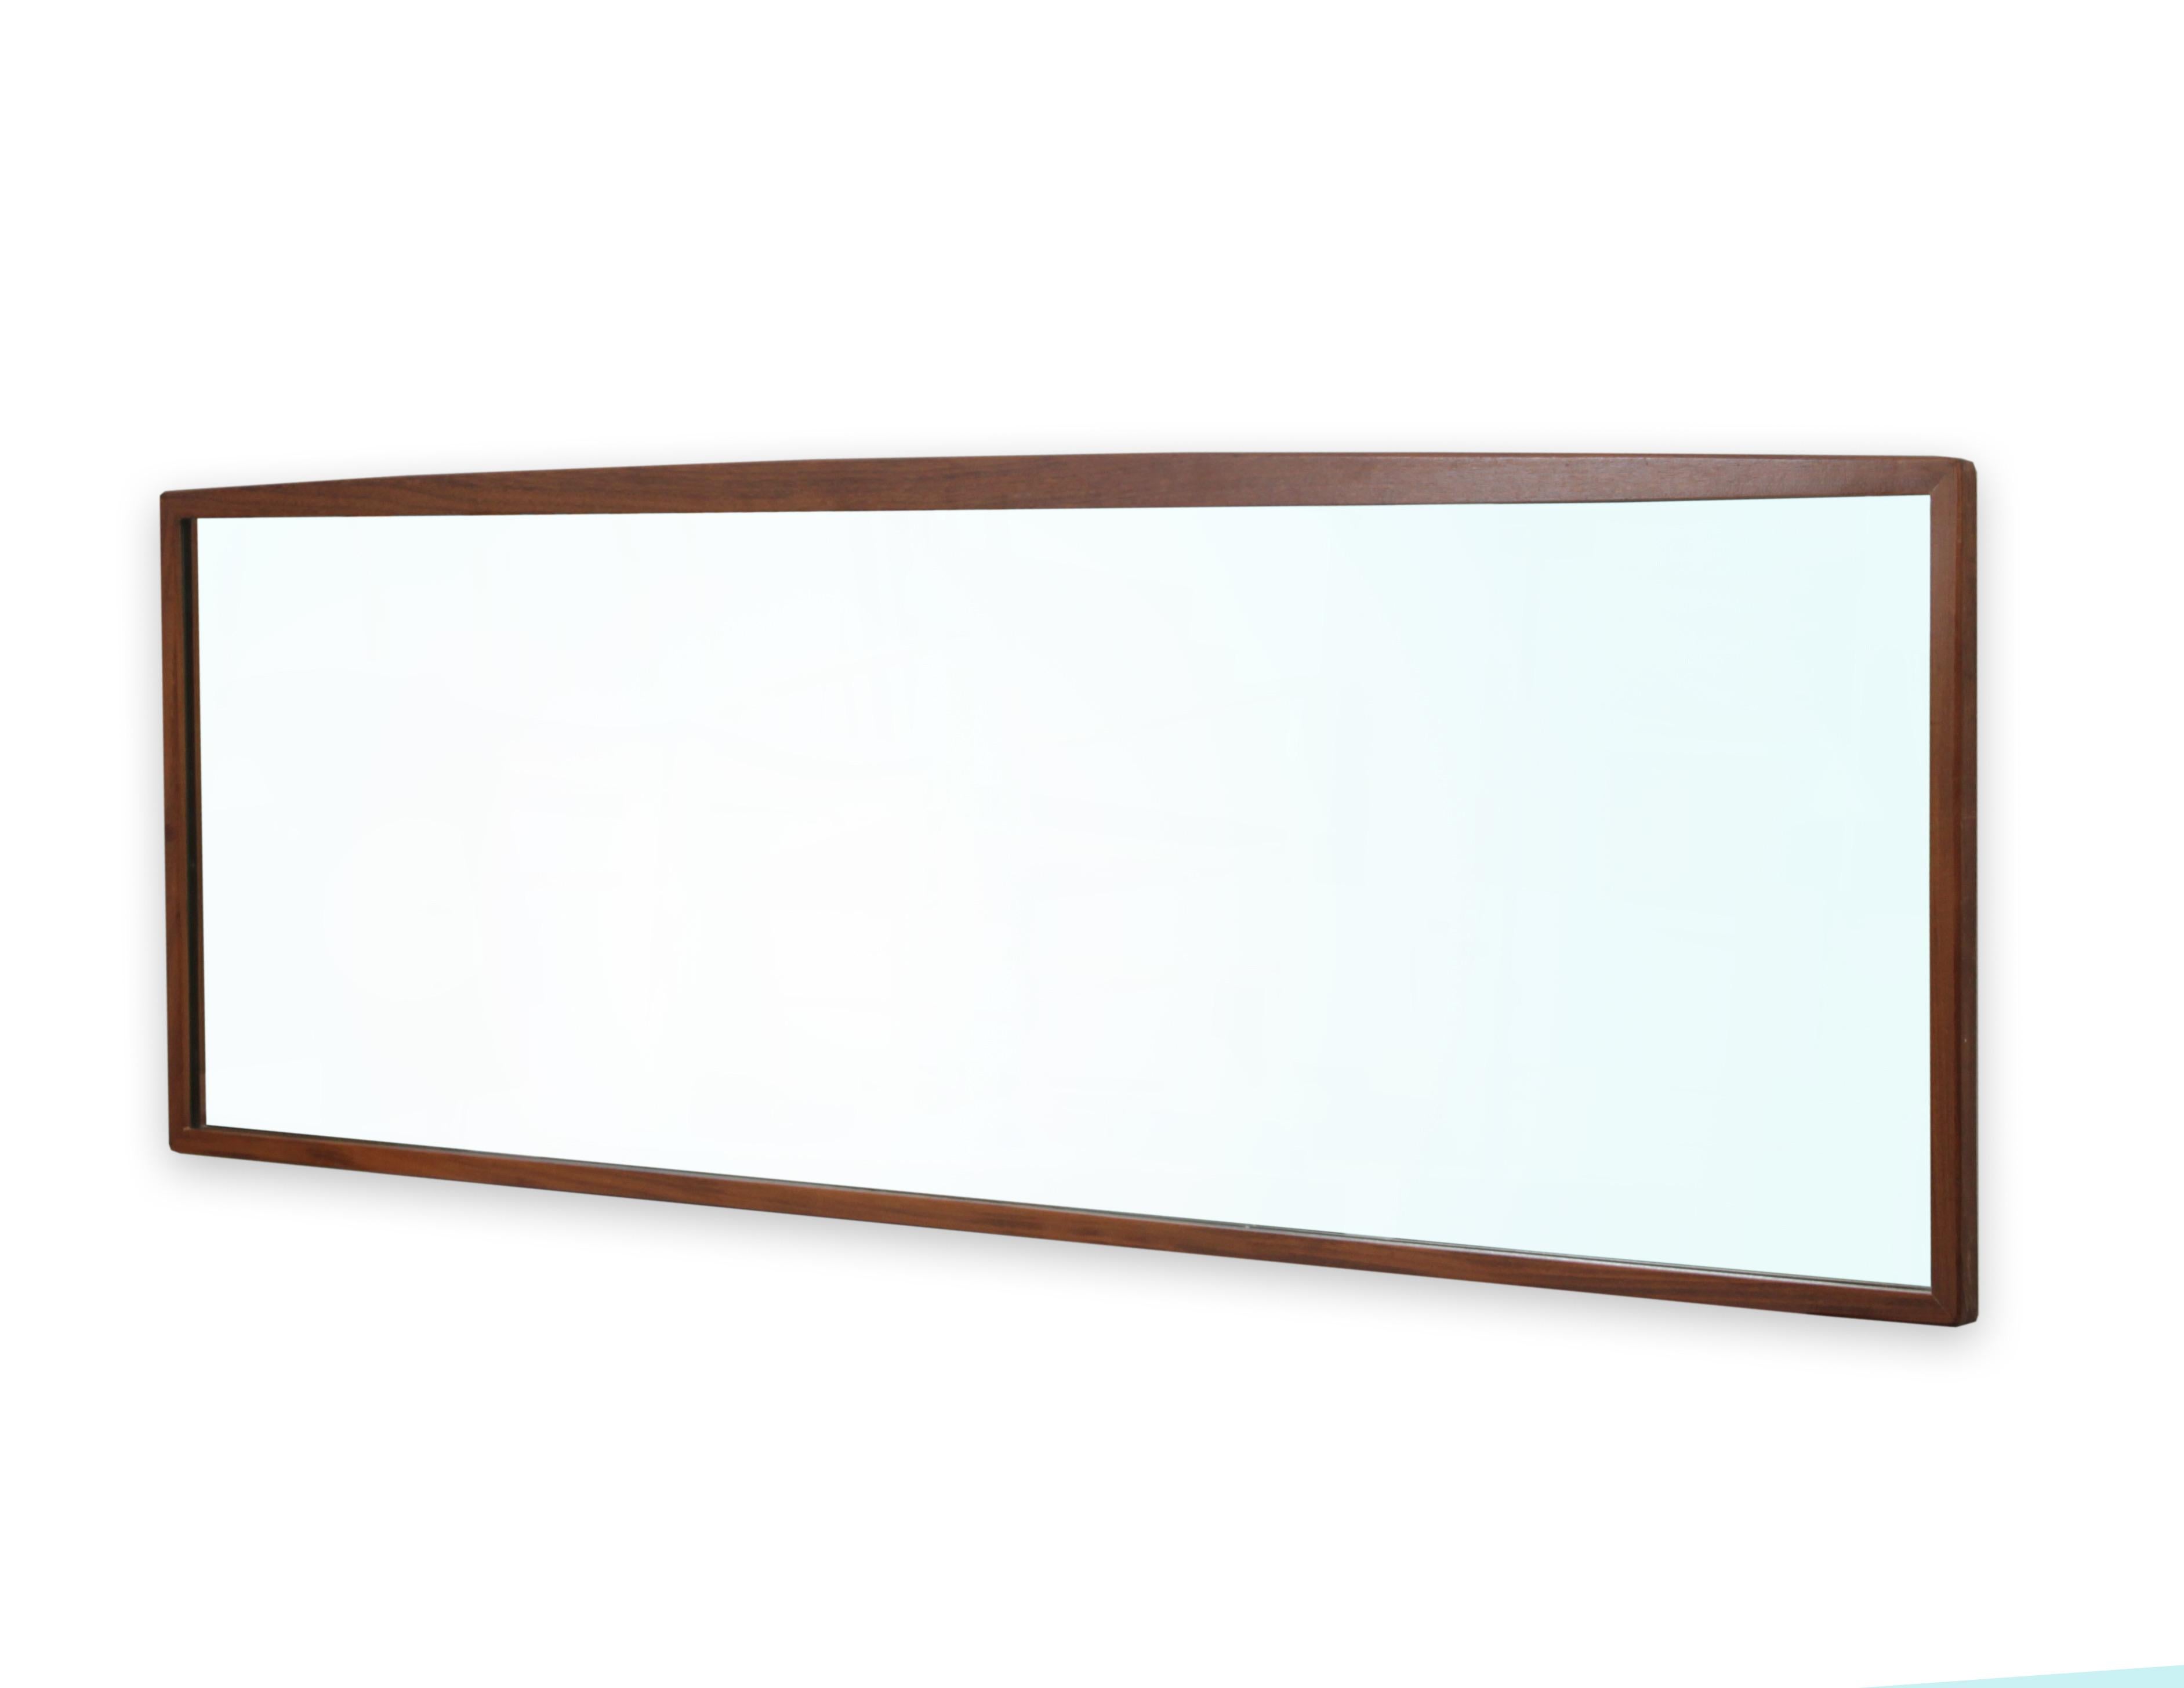 Mid-Century Modern scandinavian mirror in Rio rosewood. To be hanged horizontaly. Was probably a part of a dressing table.